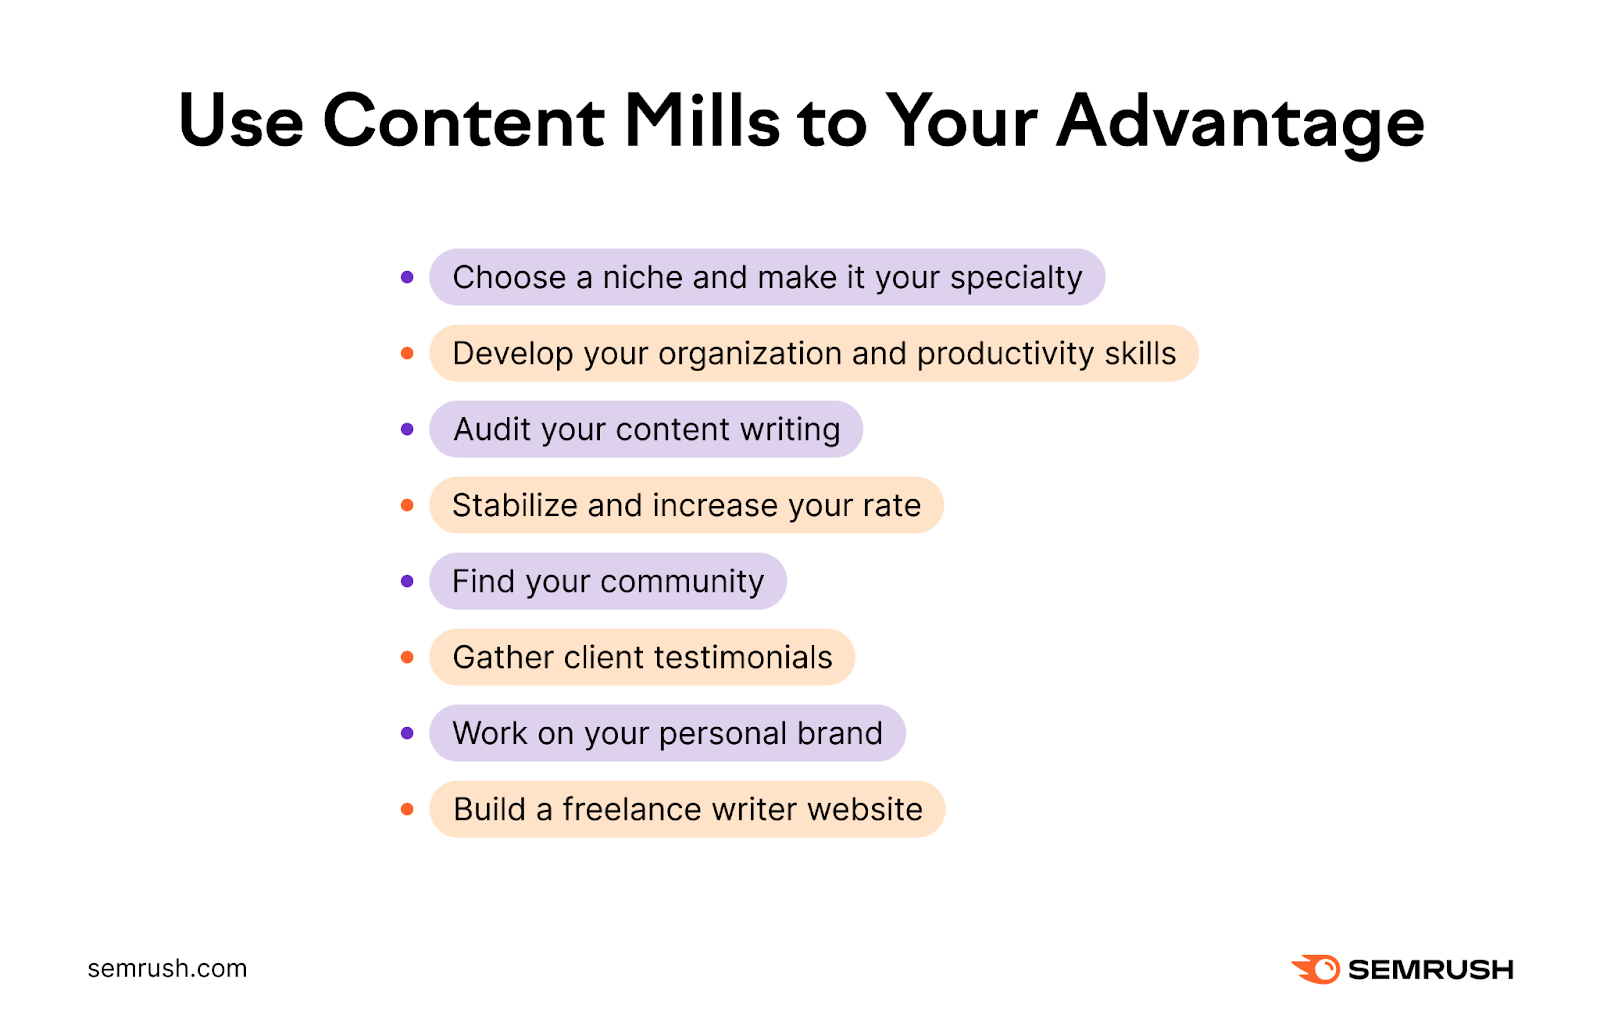 an infographic on using content mills to your advantage